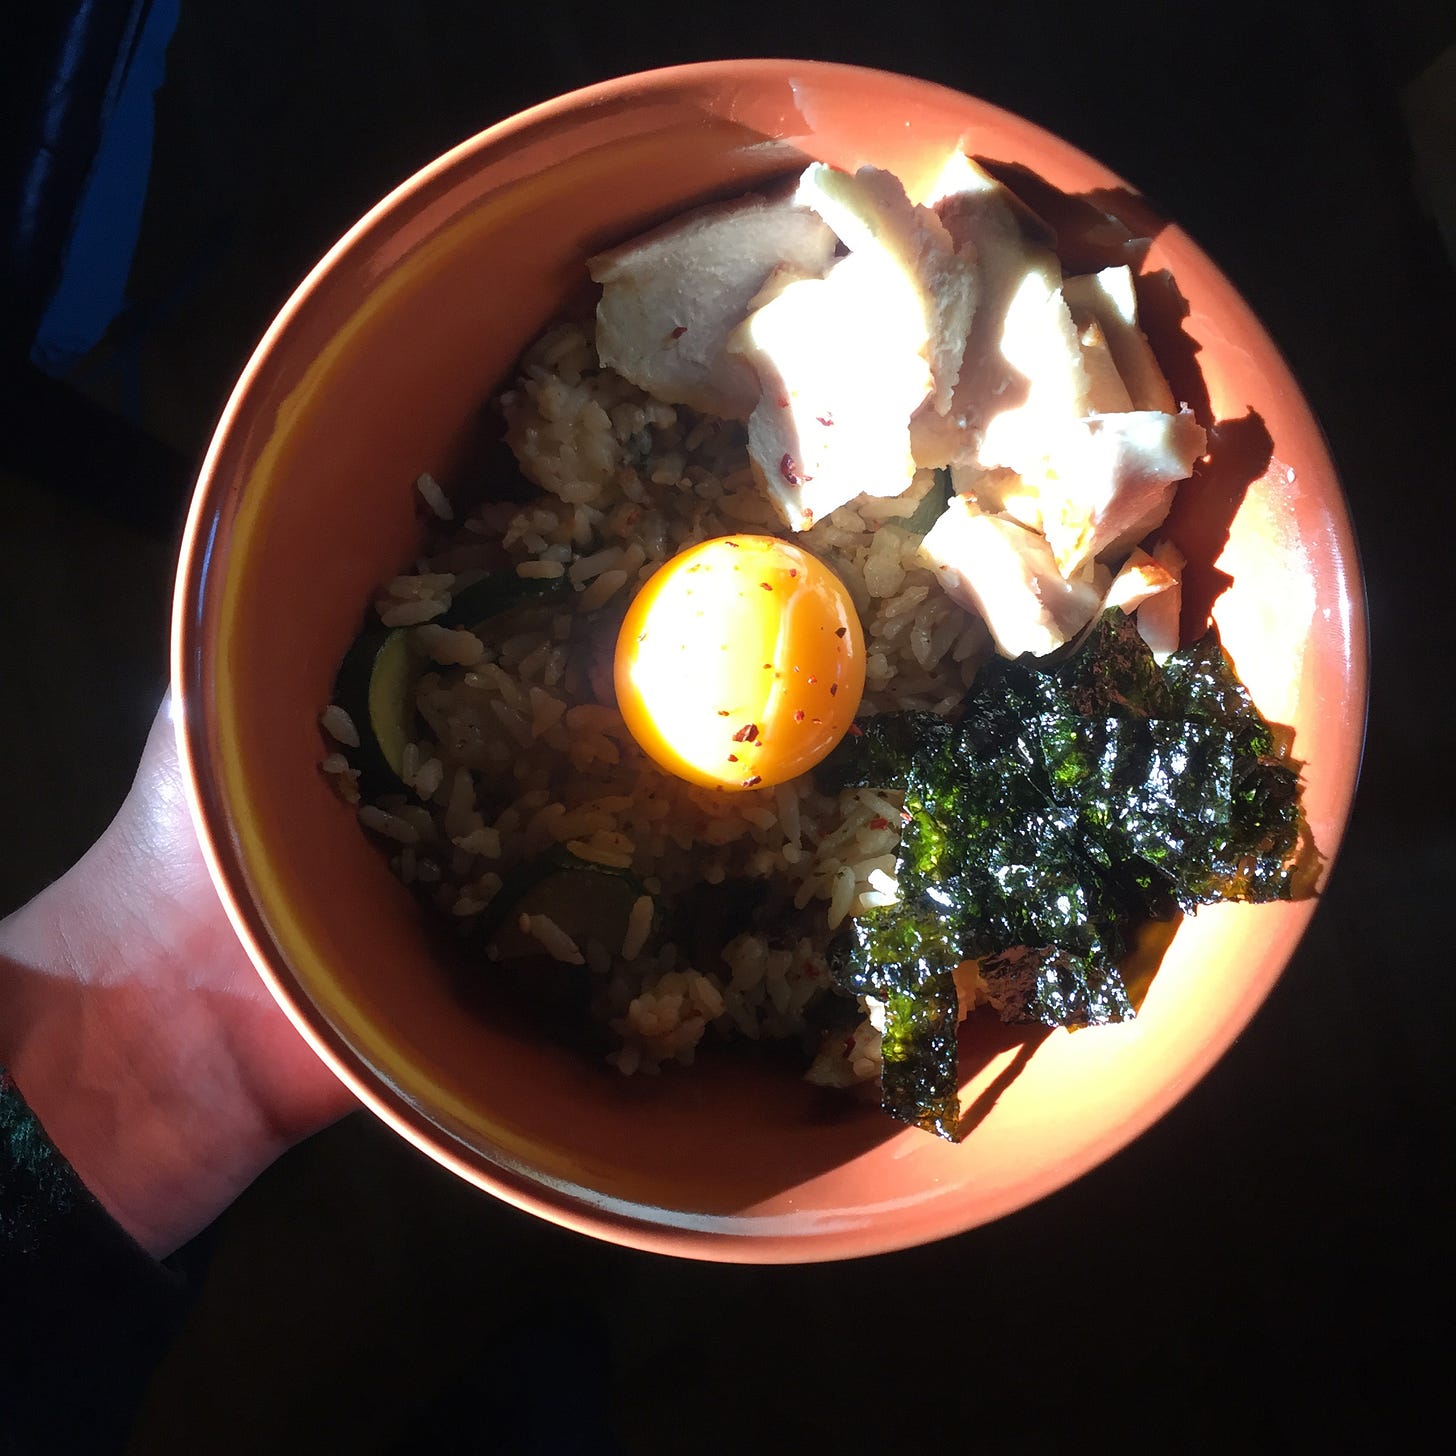 An orange bowl of fried rice with an egg yolk in the centre and little piles of dried seaweed and large flakes of salmon at the sides. The bowl is caught in a sunbeam, lighting one side of the bowl and making the background almost pure black.